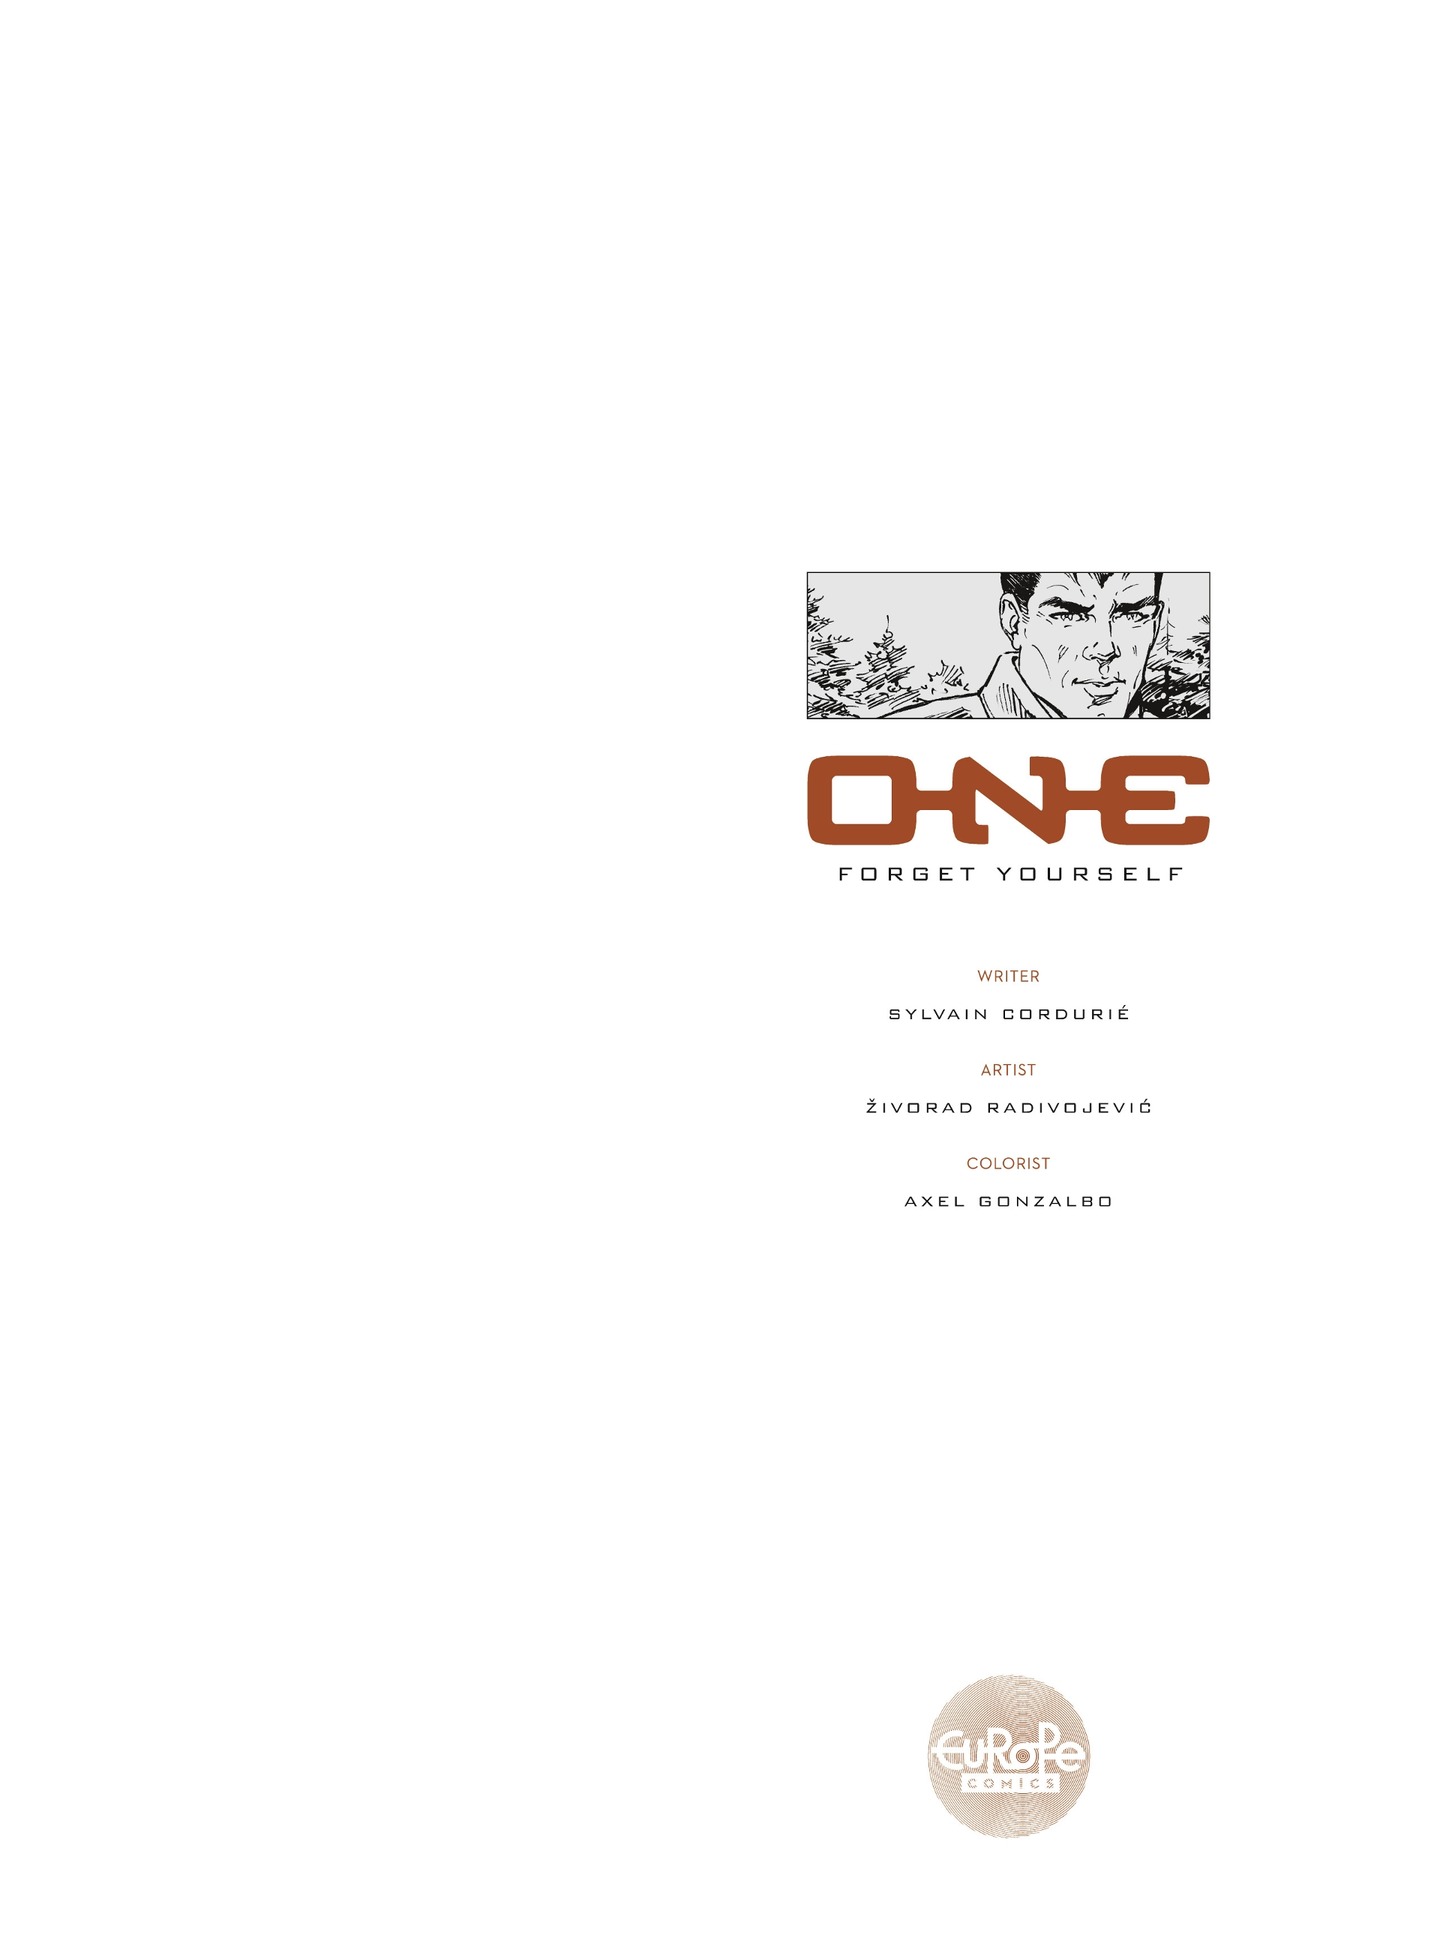 Read online One comic -  Issue #2 - 3